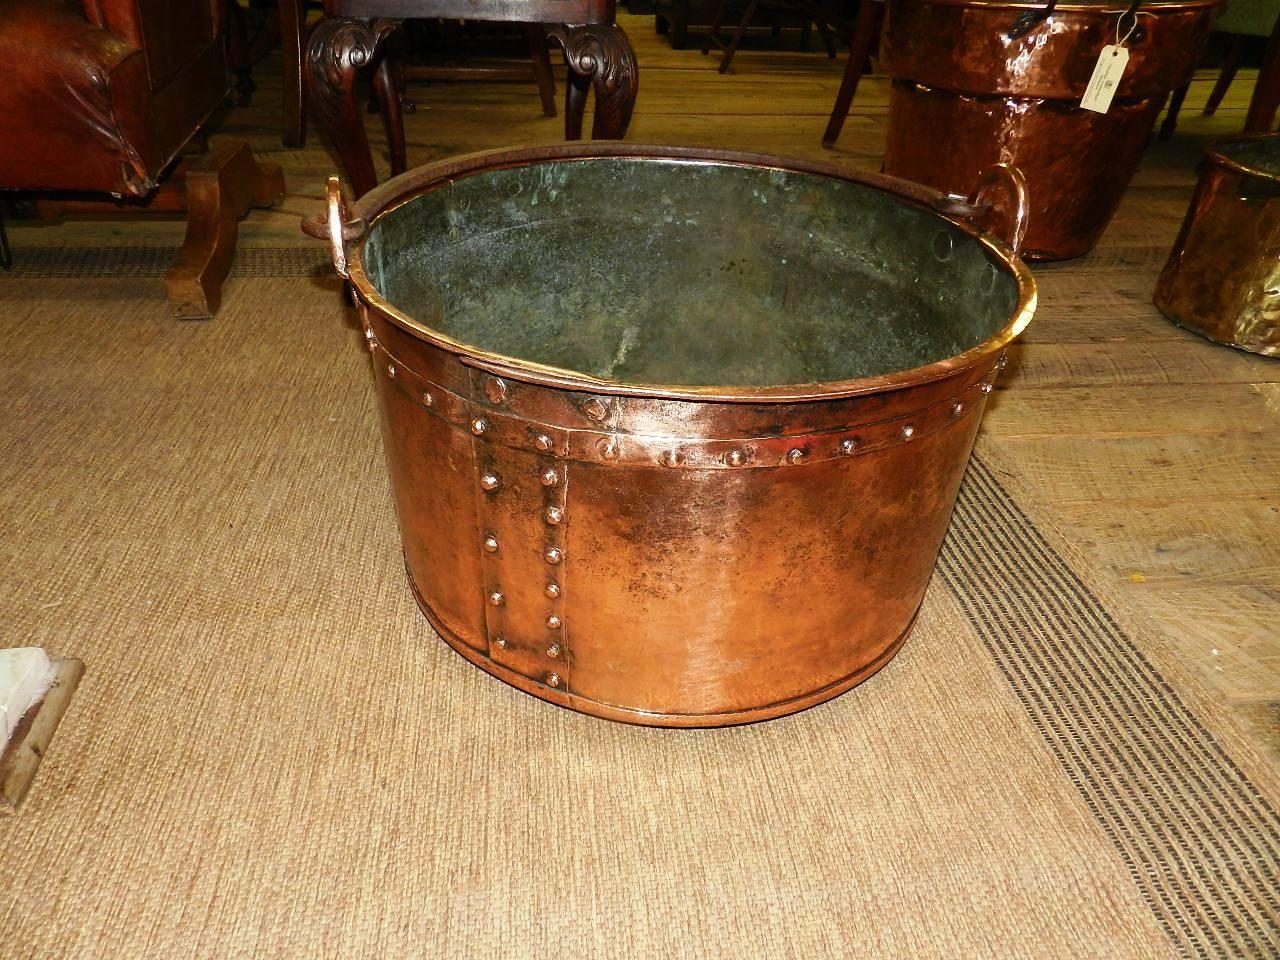 An antique copper cauldron from a French textile mill with wonderful character. The rivets and well worn appearance greatly enhance the piece. Superb for use as a fireside log holder or for drinks on the porch!